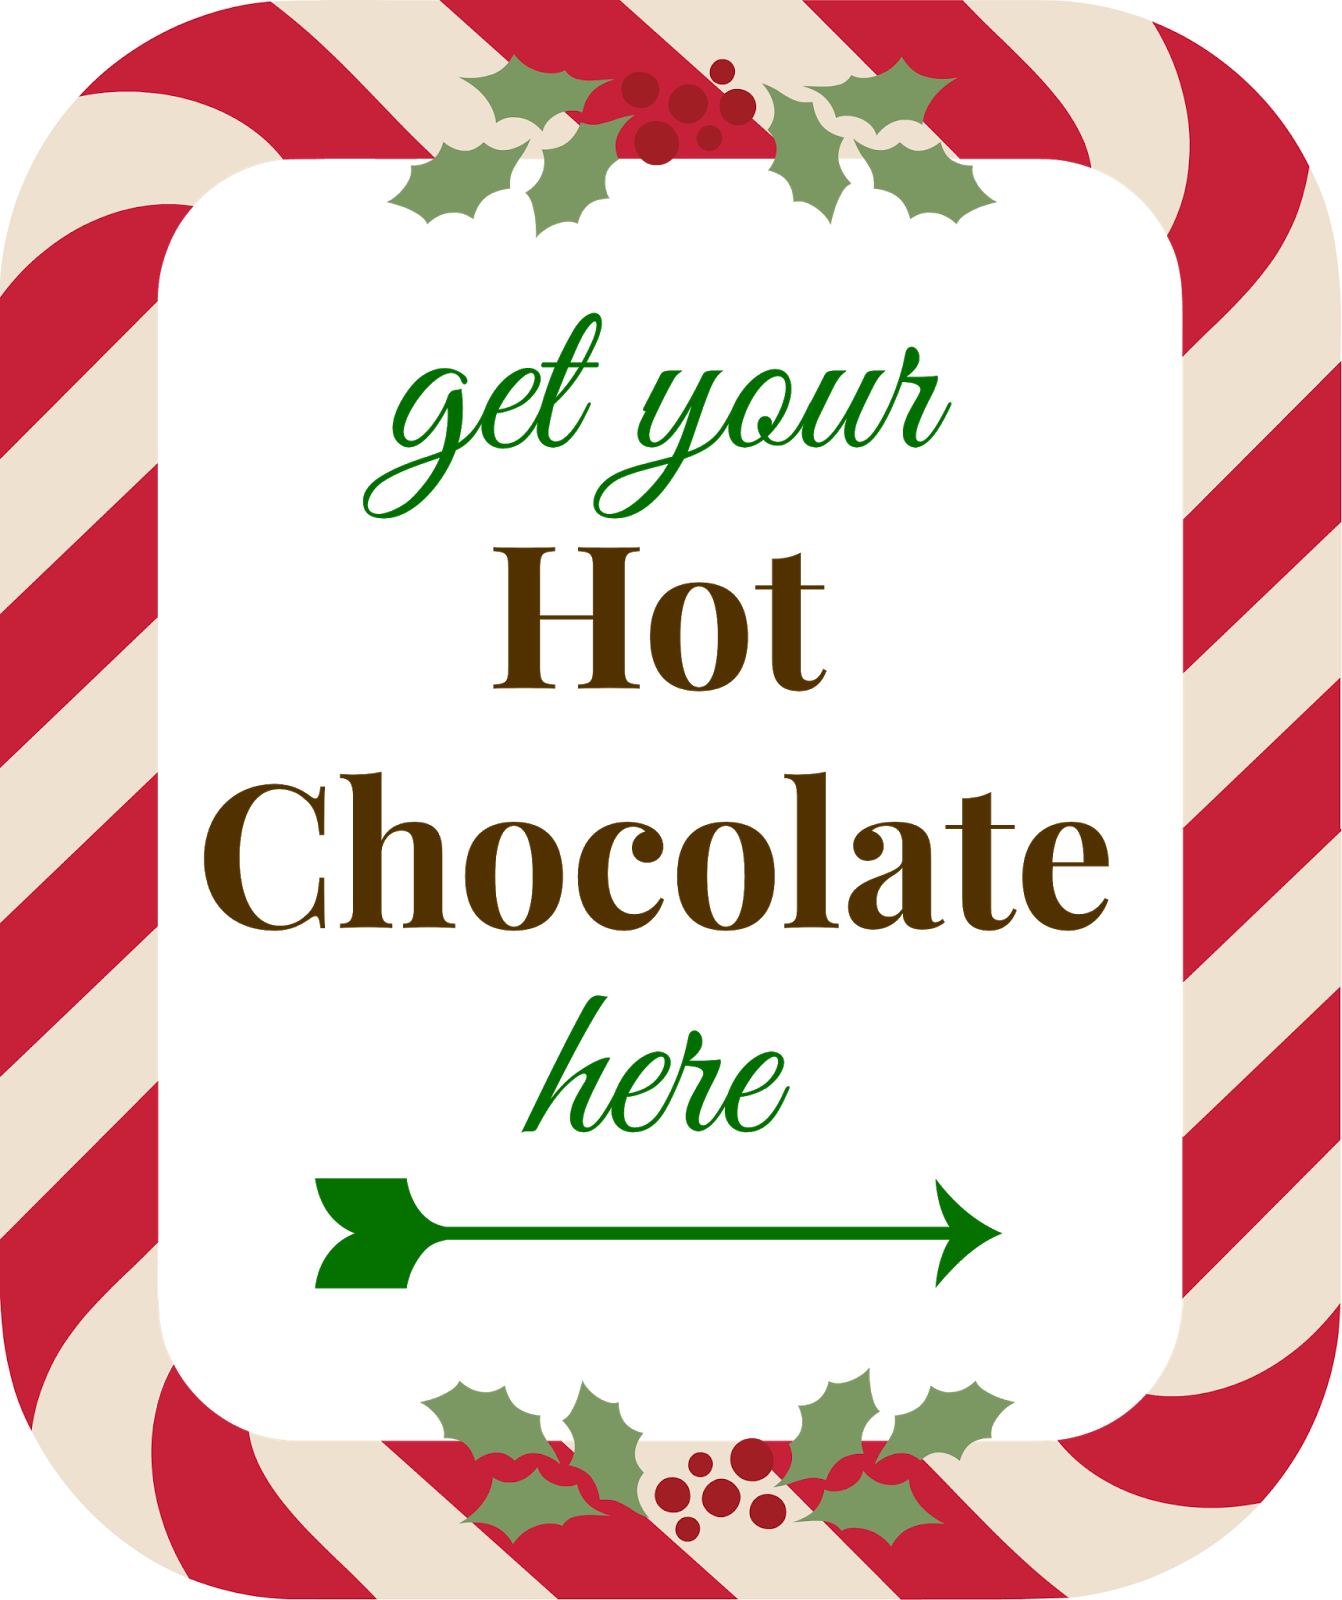 Baby, It's Cold Outside It's Been Sunny And Blue Skies - Hot Chocolate Bar Printable Sign (1342x1600)